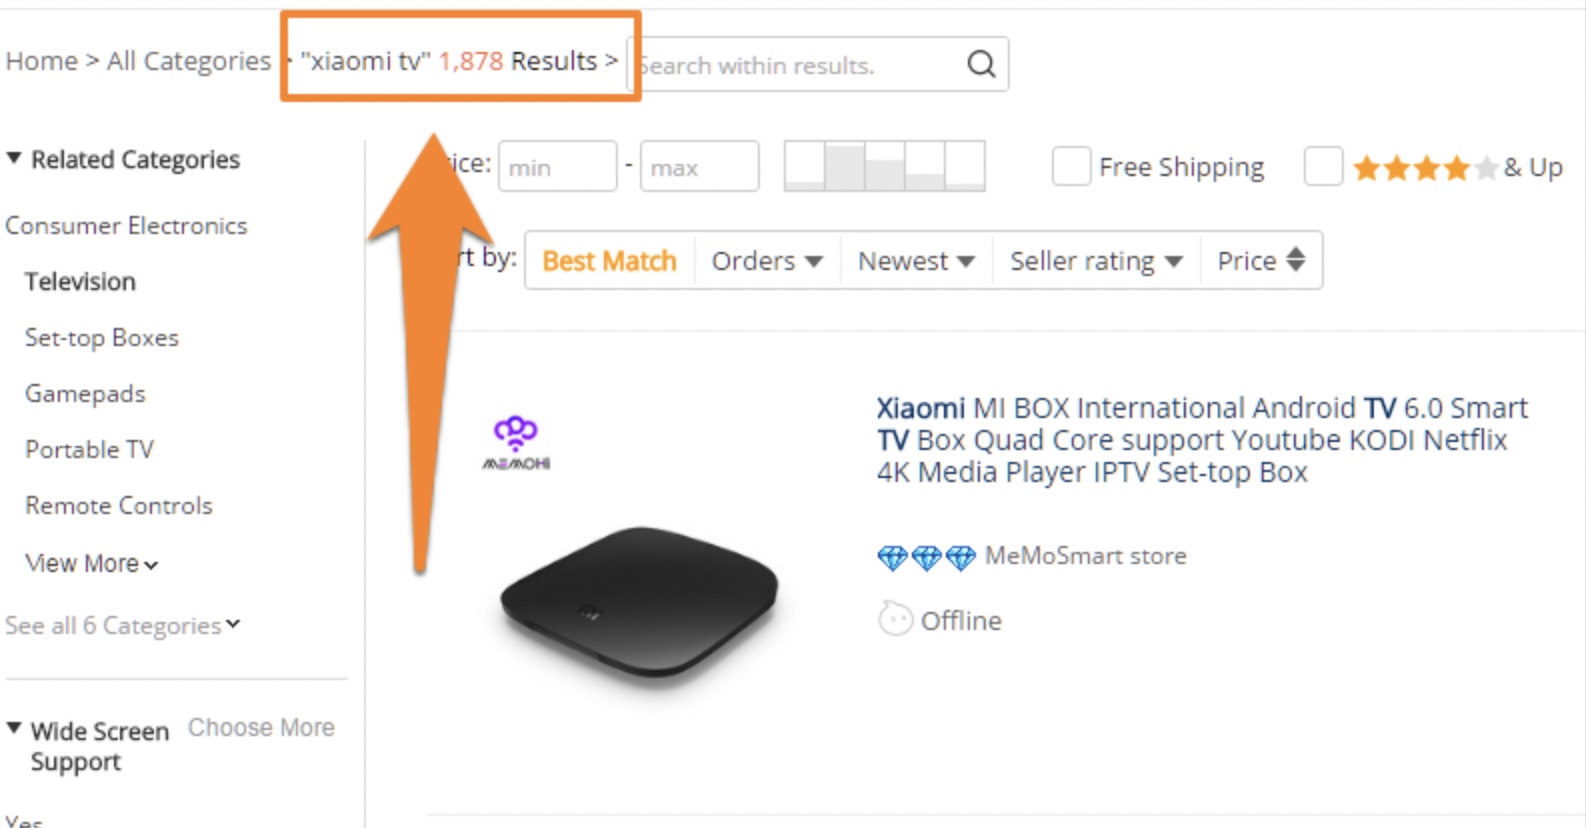 search results for “Xiaomi TV”